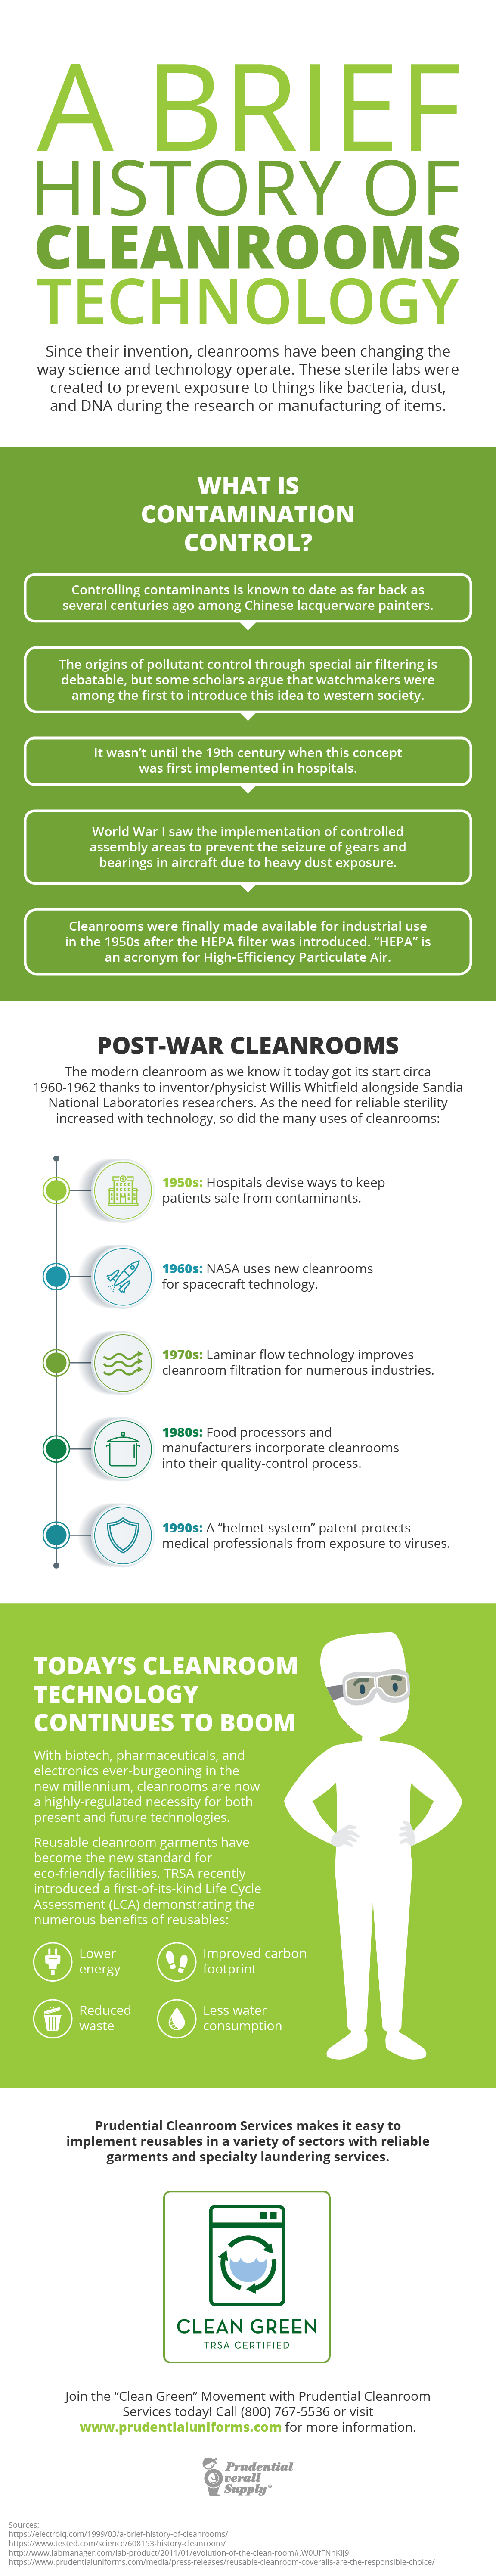 A Brief History of the Cleanroom